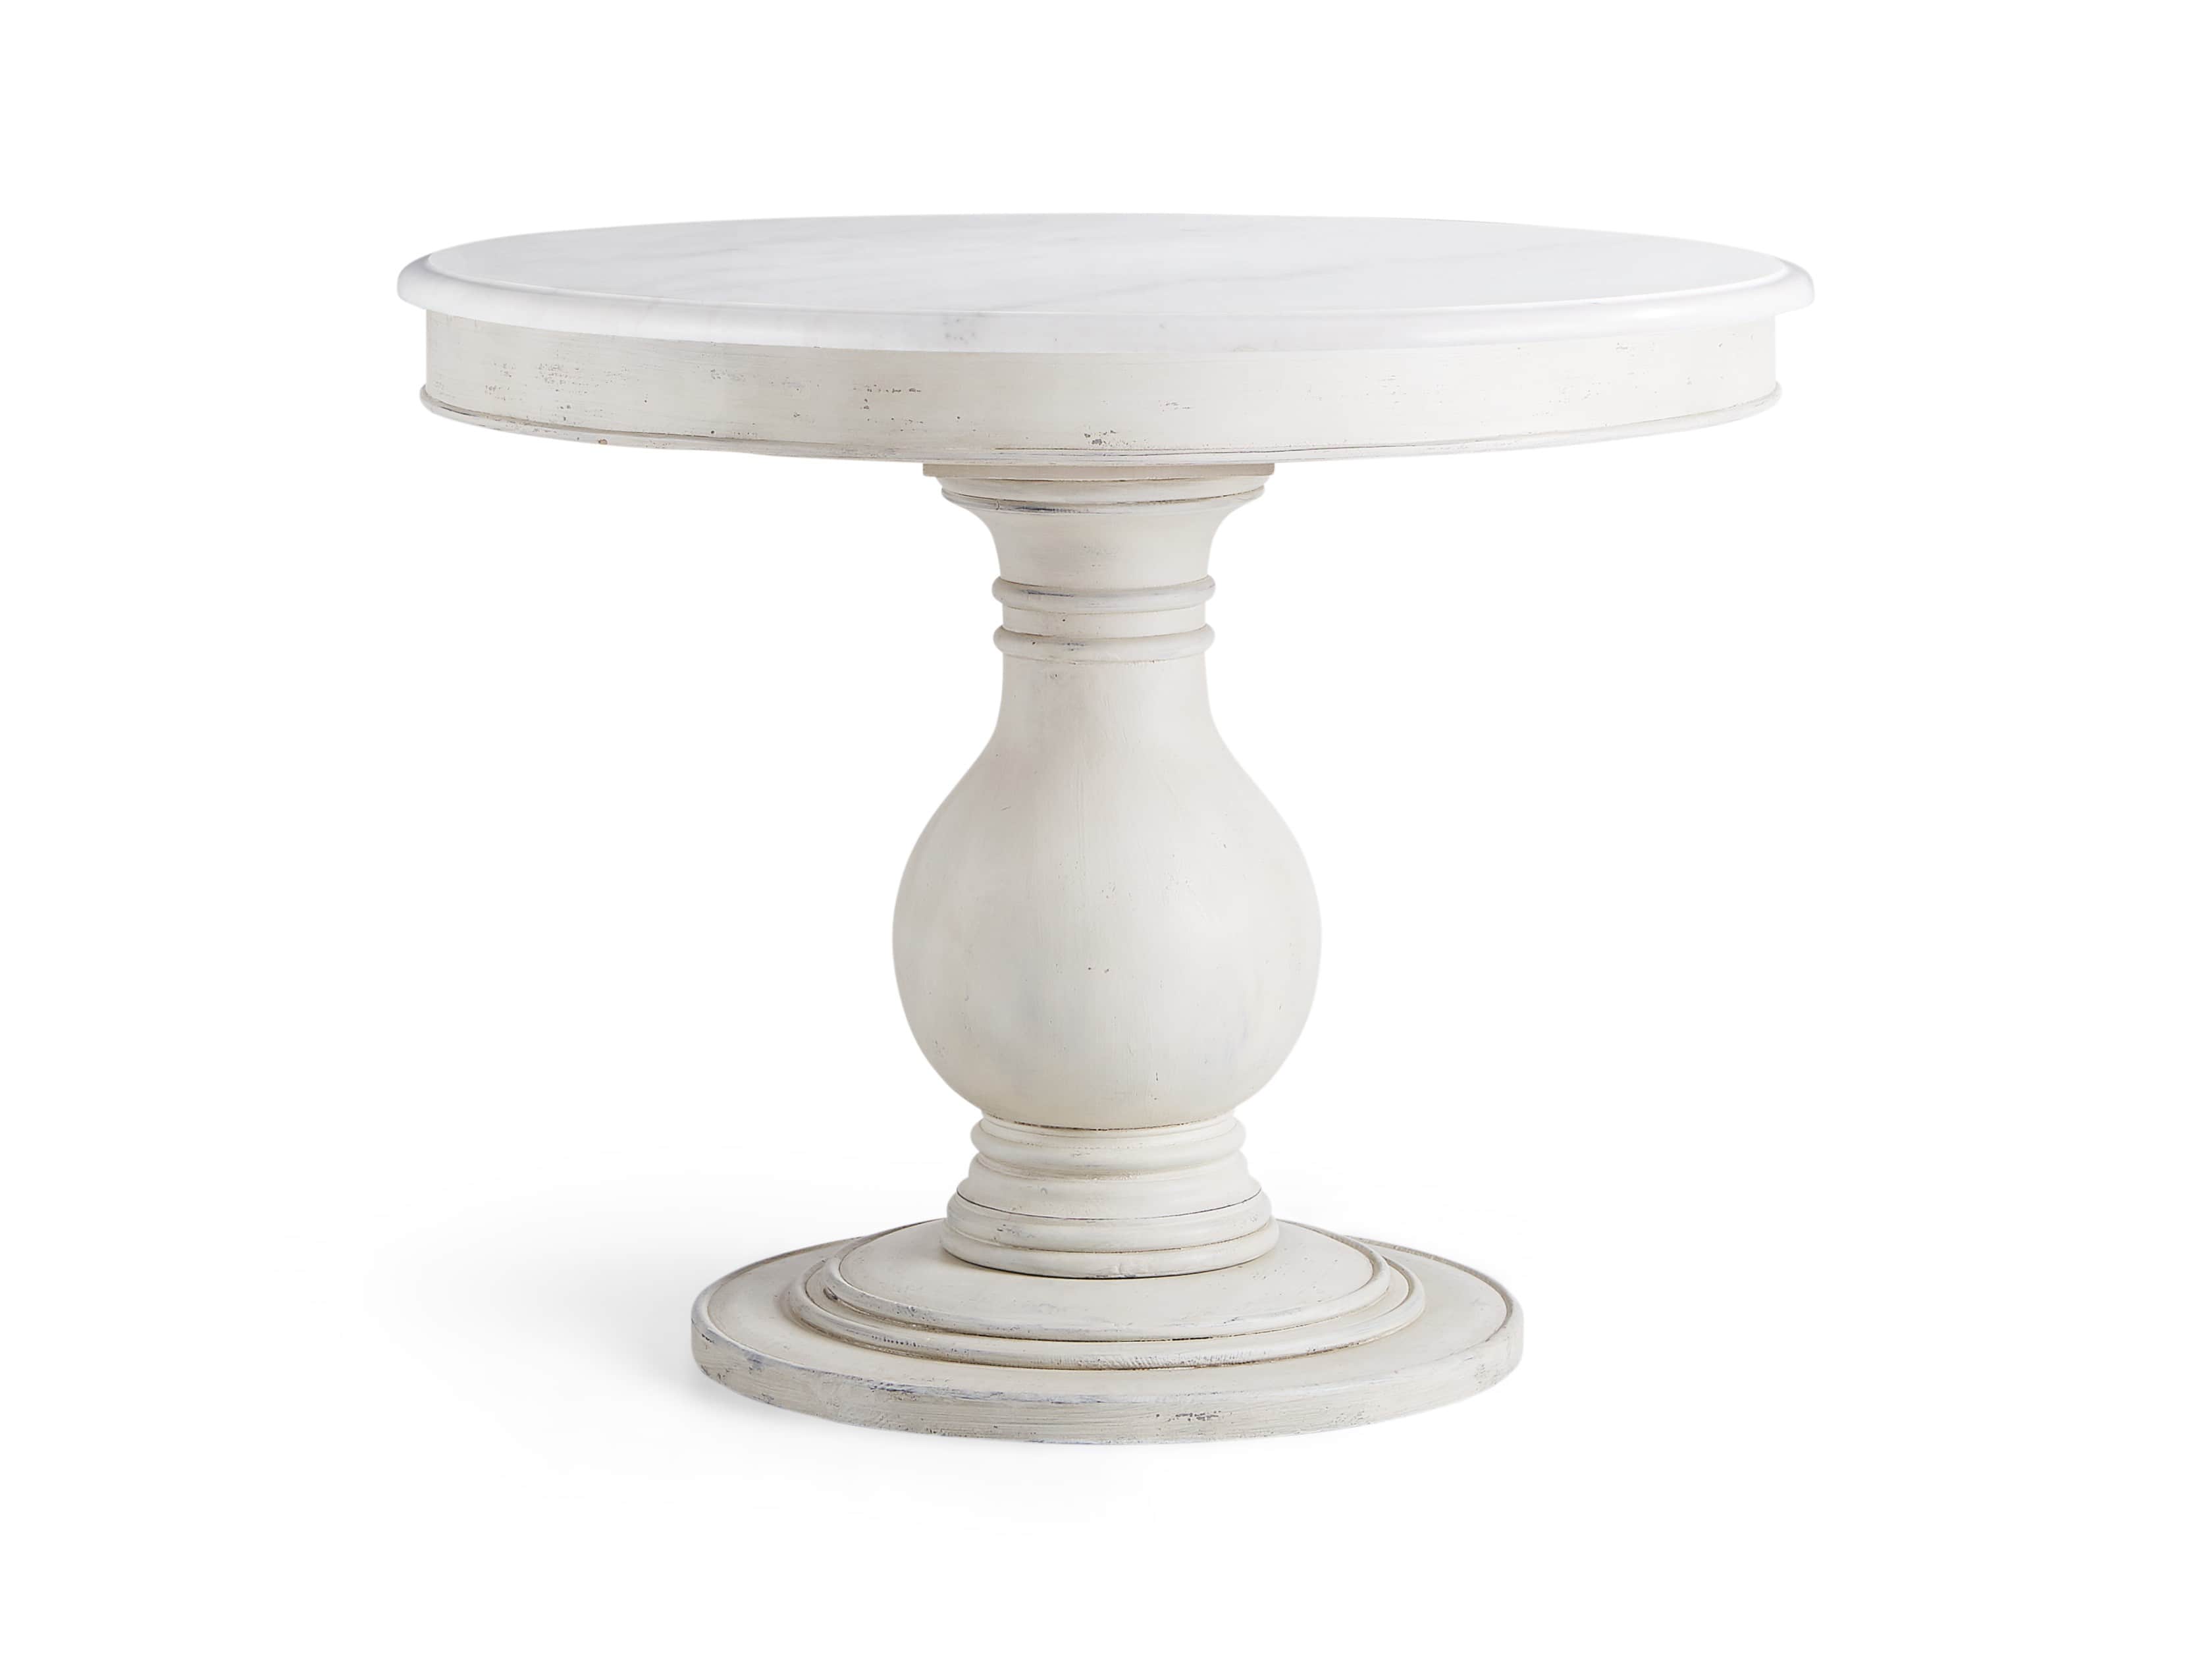 Luca Round Dining Table with White Marble Top in Rustic White - Come take a peek at more Arhaus French Vintage Timeless Furniture, Decor and Lighting on Hello Lovely Studio.